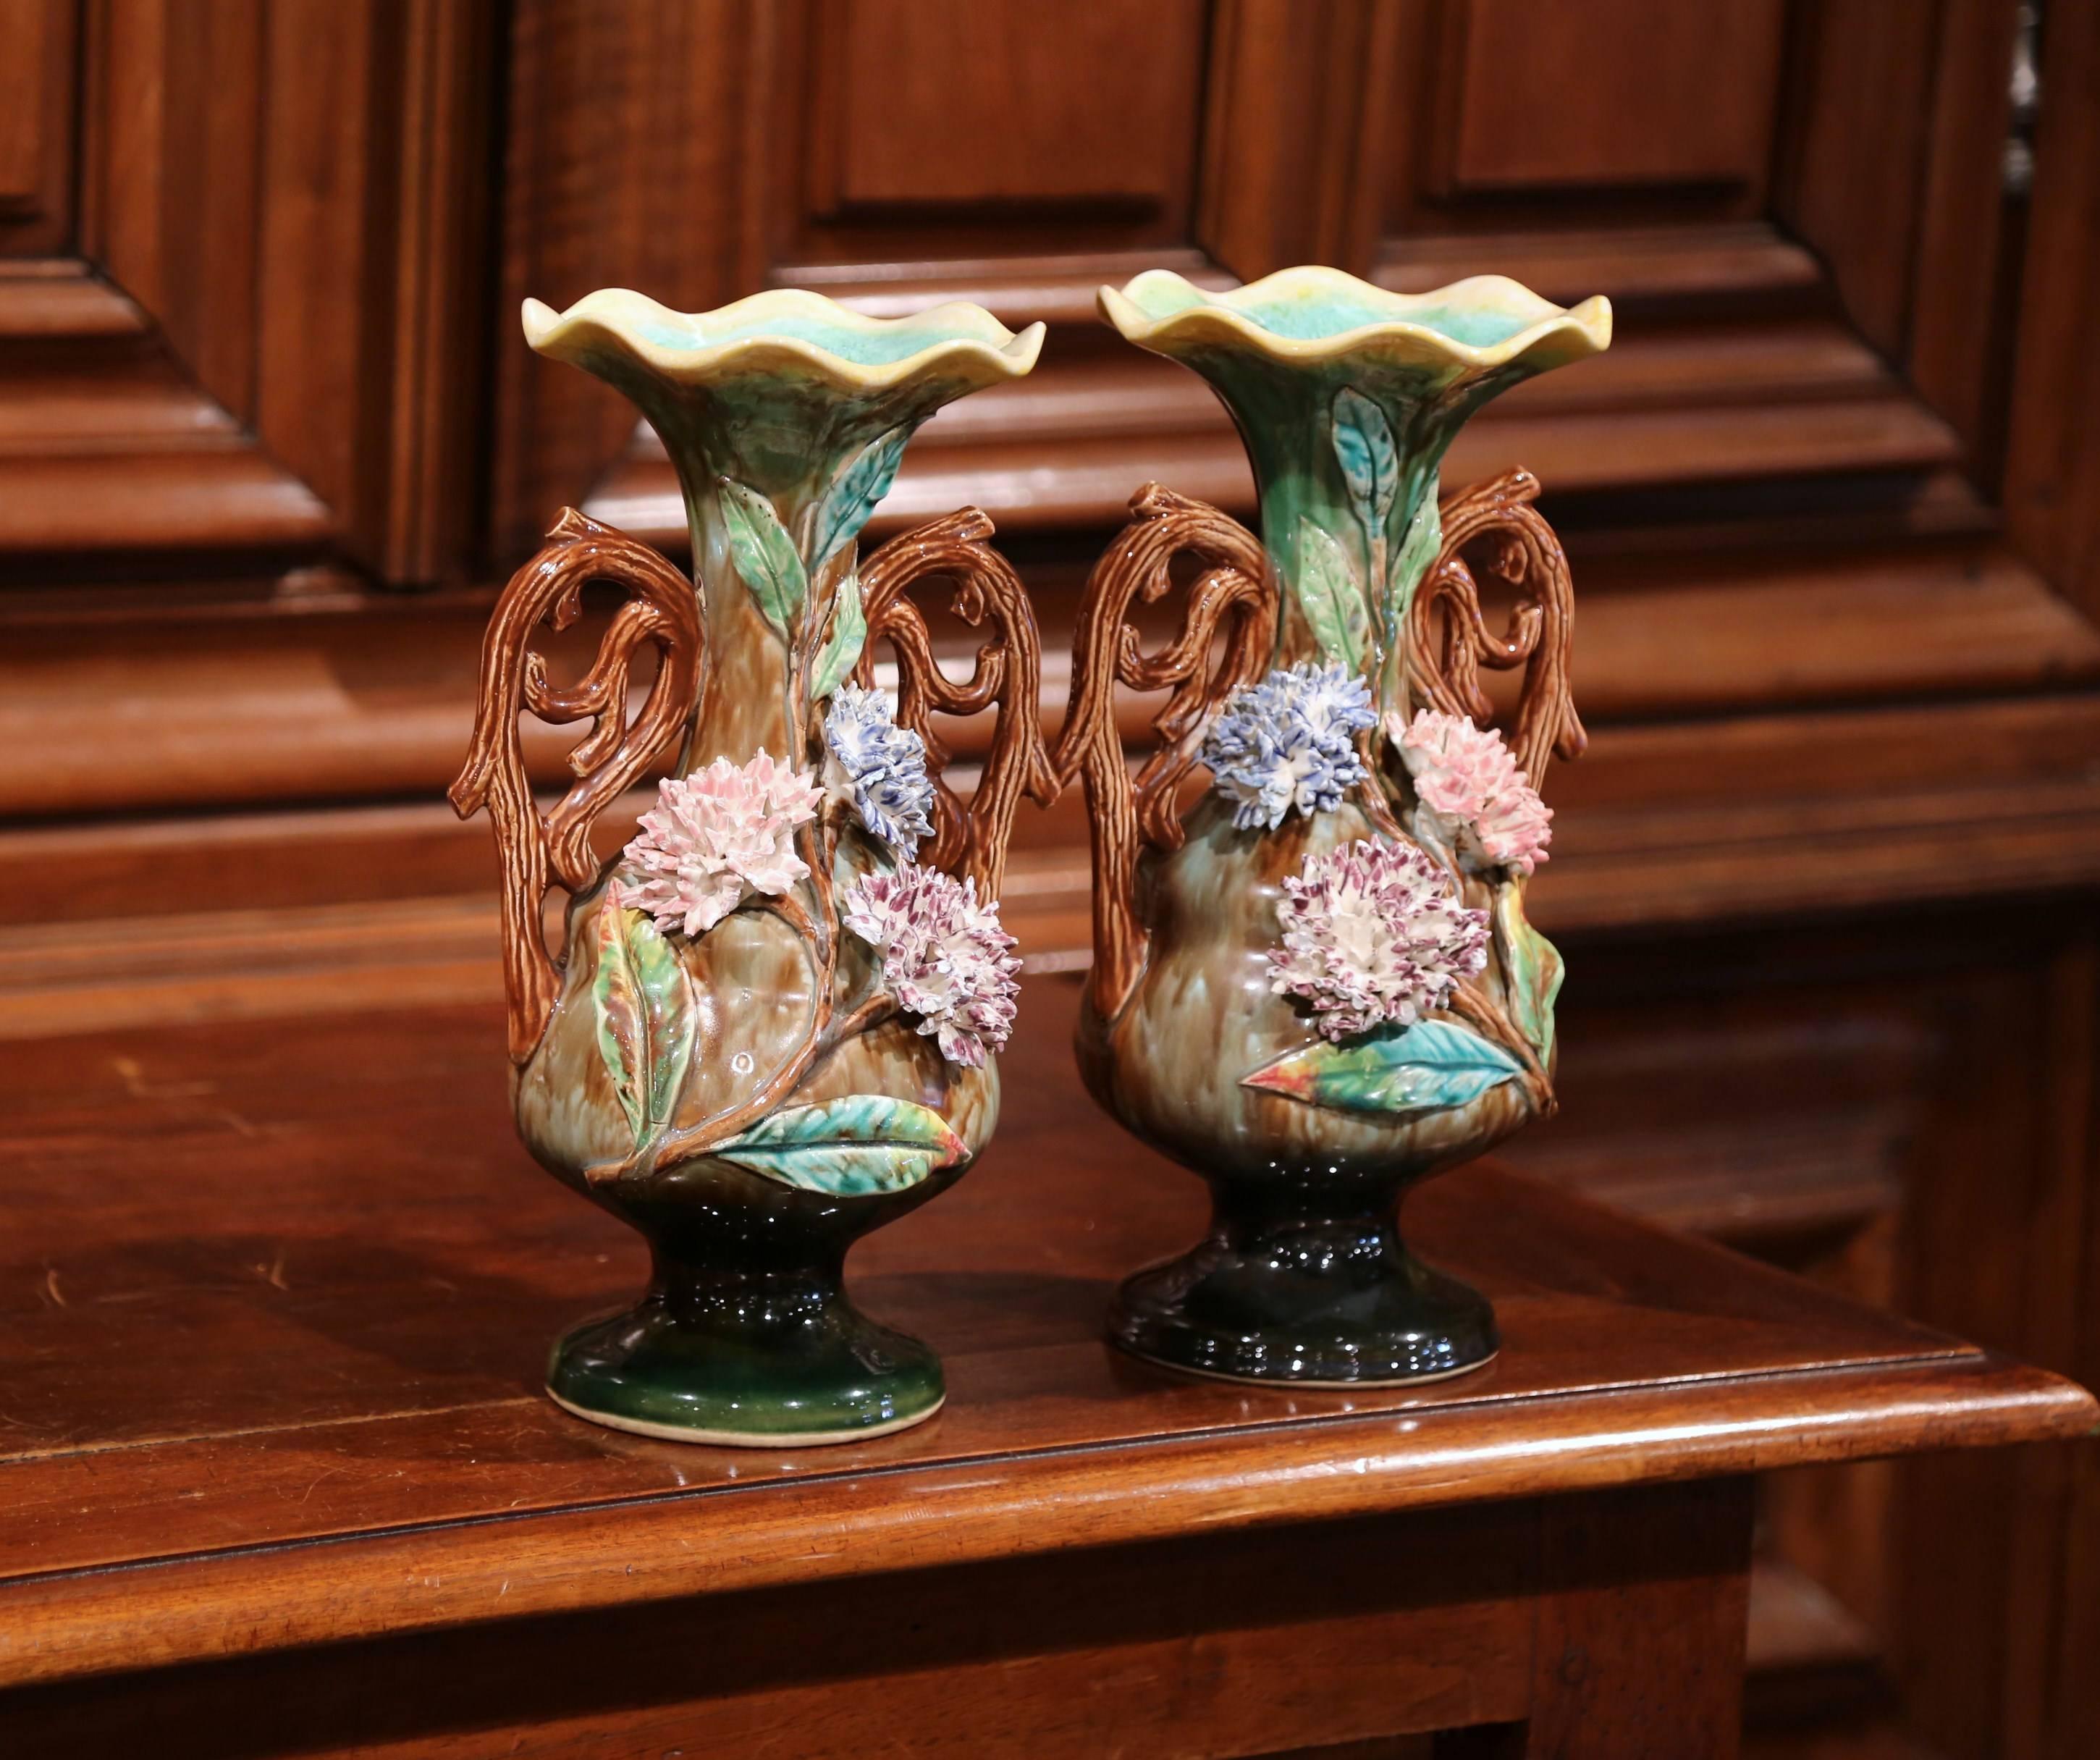 This colorful pair of antique Majolica vases were crafted in France, circa 1880. Each artful vase features hand-painted hydrangea flowers, stems and leaves in a realistic high relief shape. The vases have handles shaped like plant roots and are in